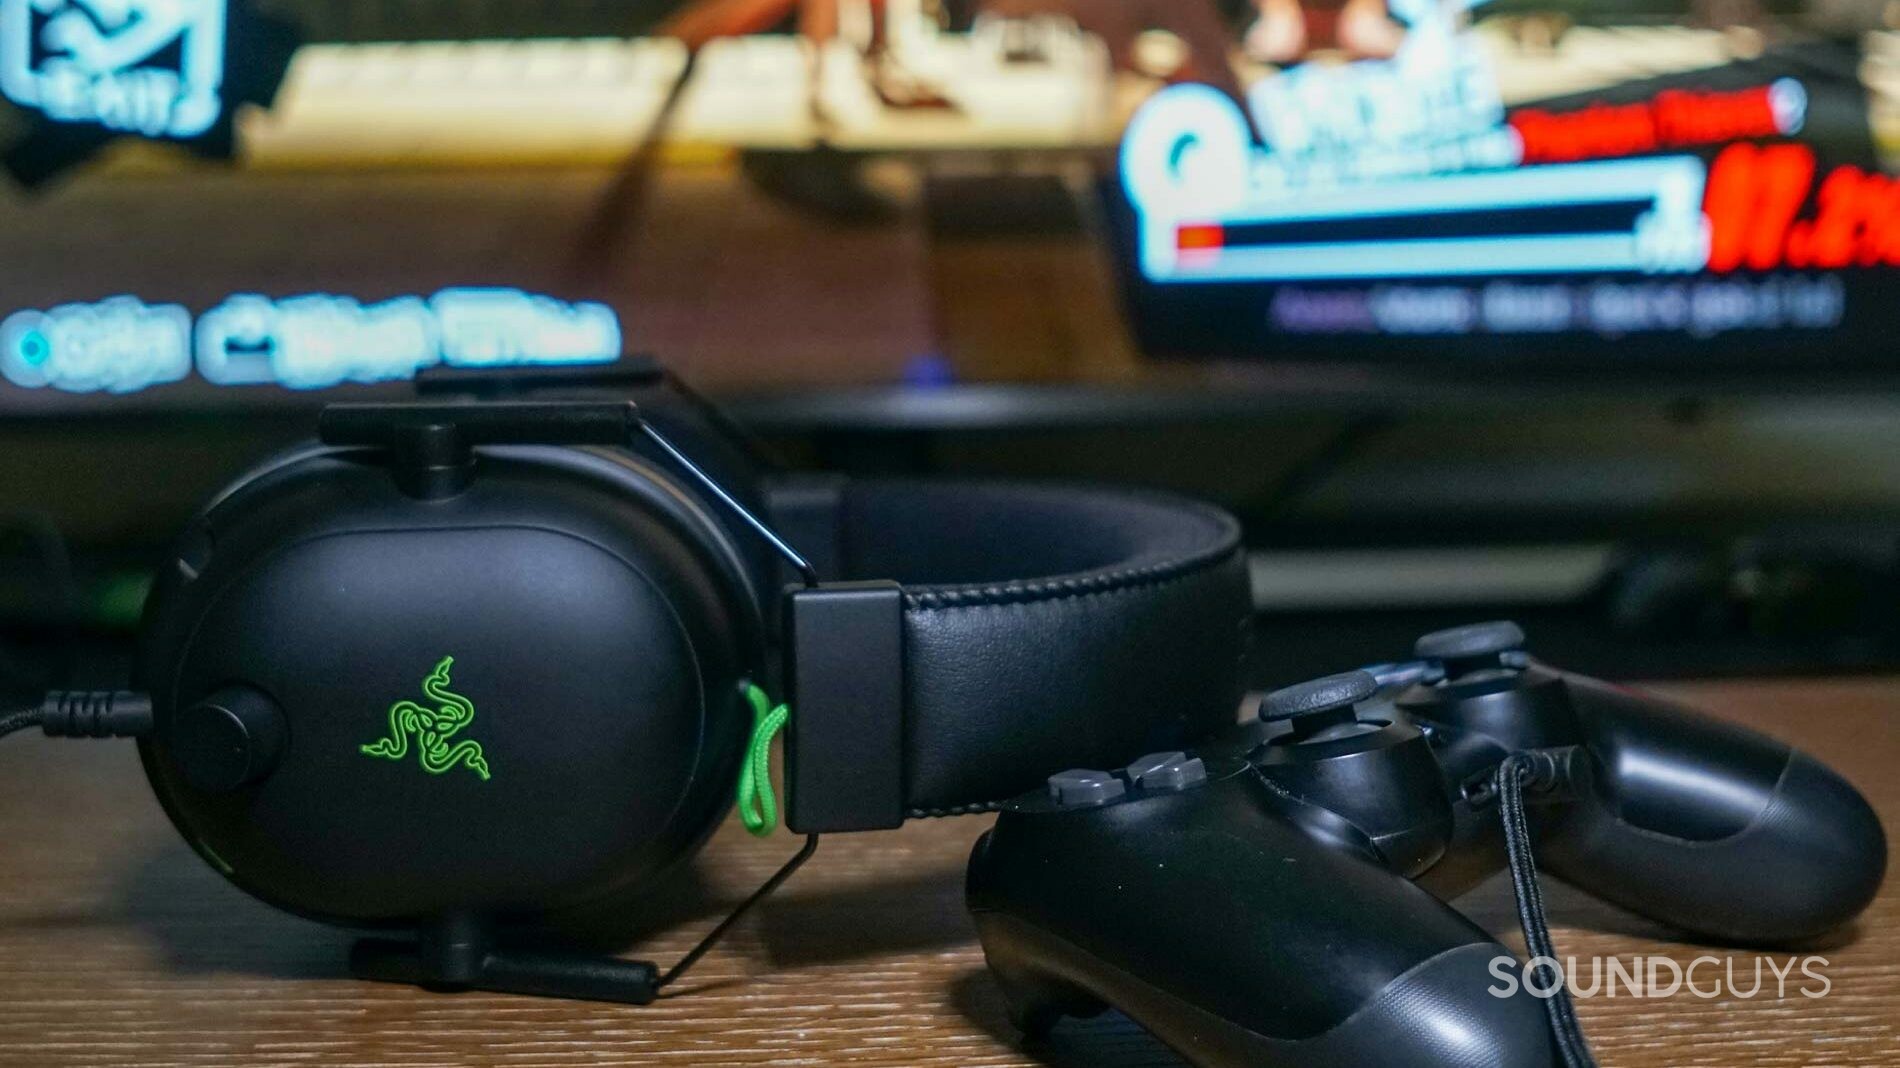 The Razer BlackShark V2 gaming headset sits on a wooden table, leaning on a PlayStation DualShock 4 controller in front of a television with Persona 5 Royal on it.